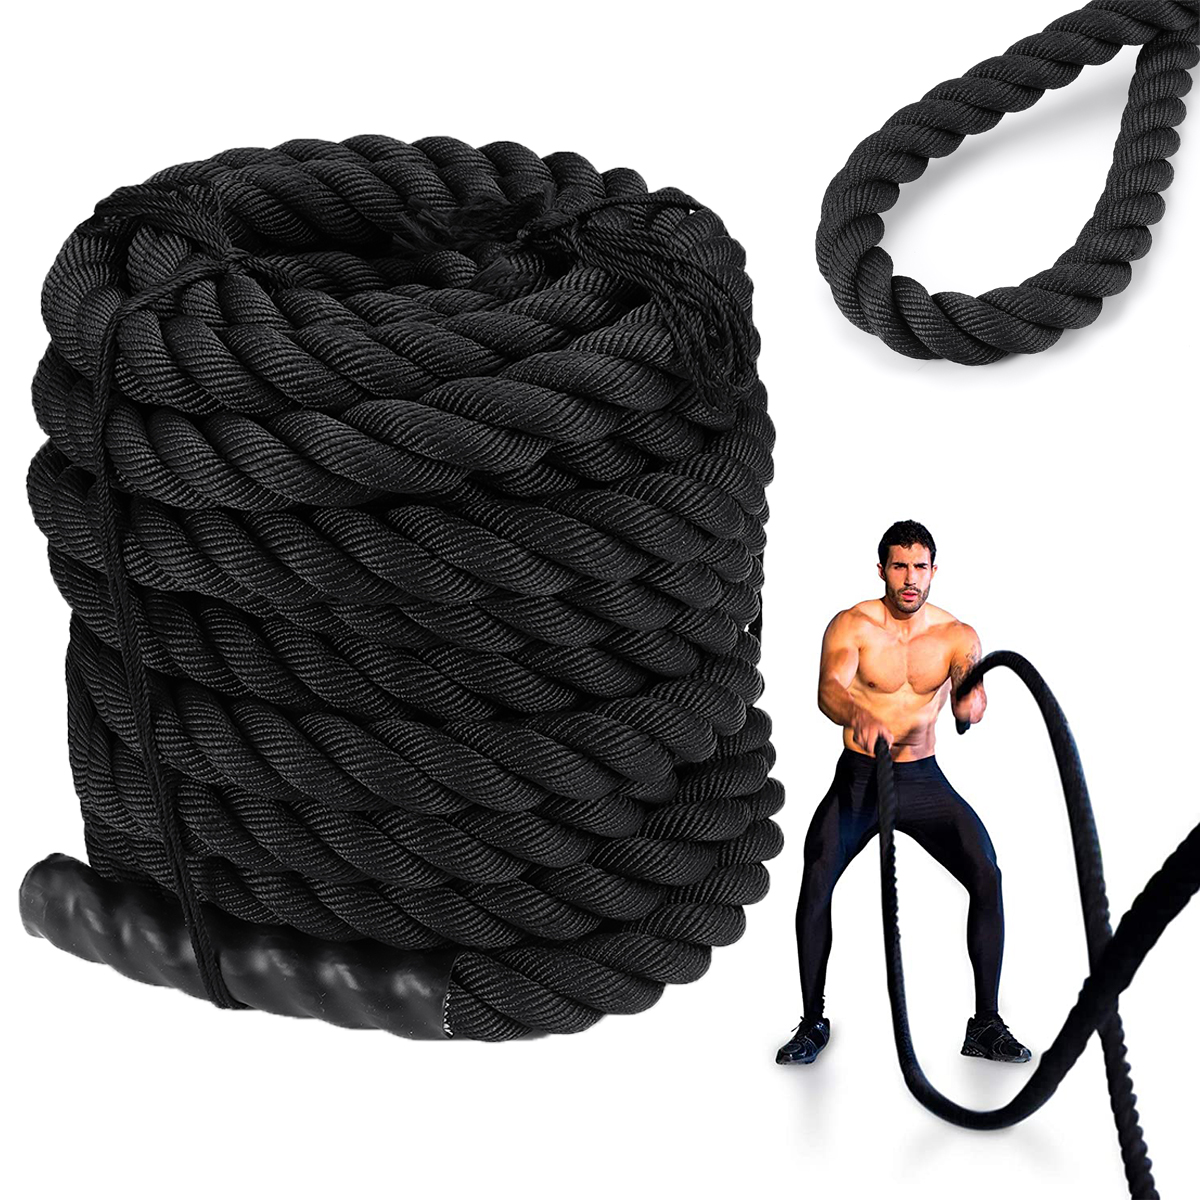 91215m-Battle-Rope-Strength-Training-Undulation-Rope-Exercise-Tools-Home-Gym-Fitness-Equipment-1858044-3